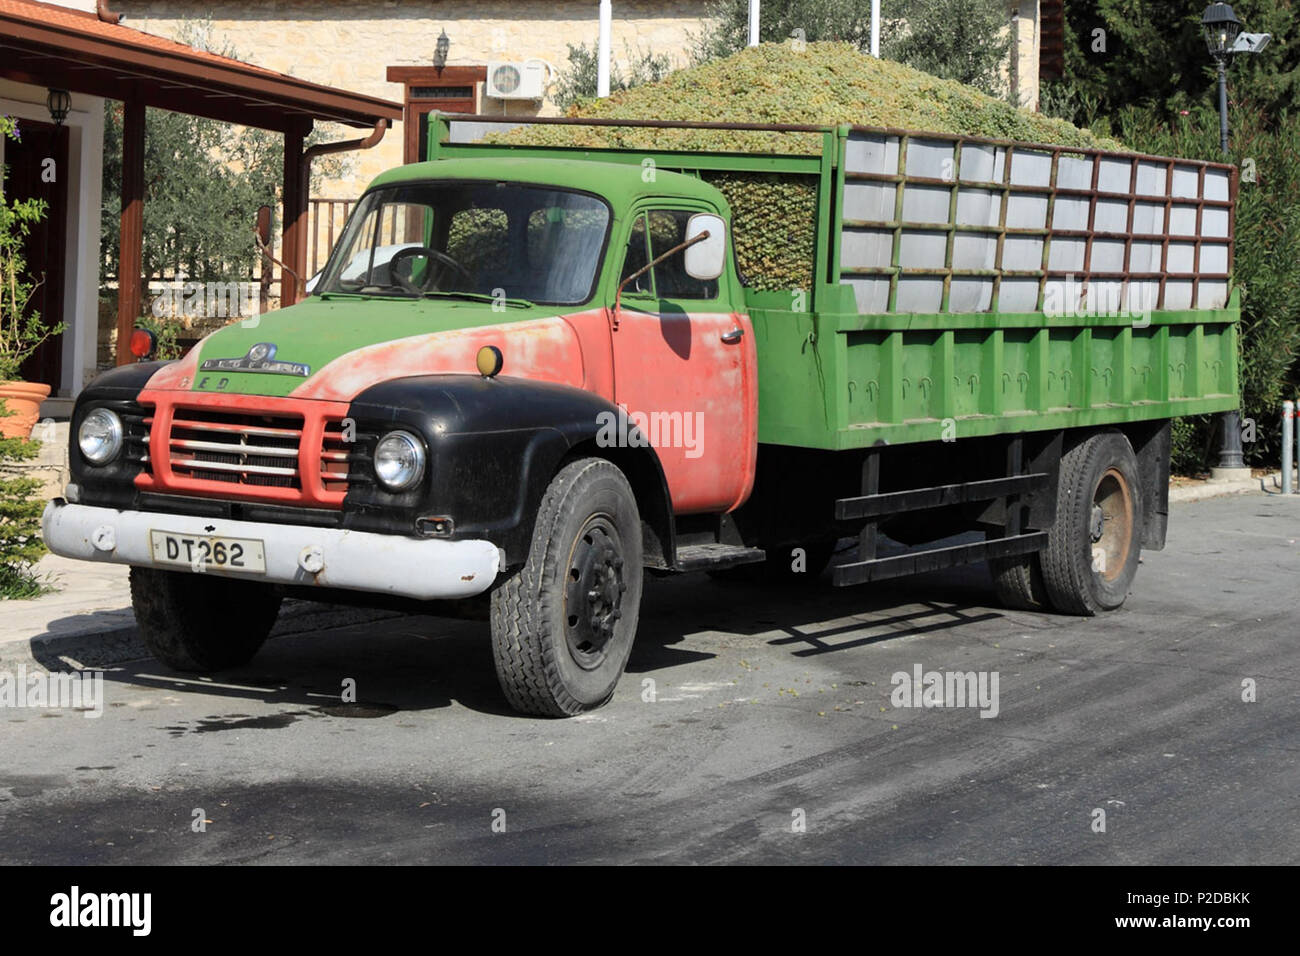 . English: a lorry loaded with grapes in Cyprus. Camera Information Model: Canon EOS 50D Manufacturer: Canon Shutter speed: 1/200 Aperture: f 5.6 Sensitivity: ISO 100 Focal length of the lens: 31 mm . Unknown date. Petr Kratochvil 23 Grape truck in cyprus Stock Photo